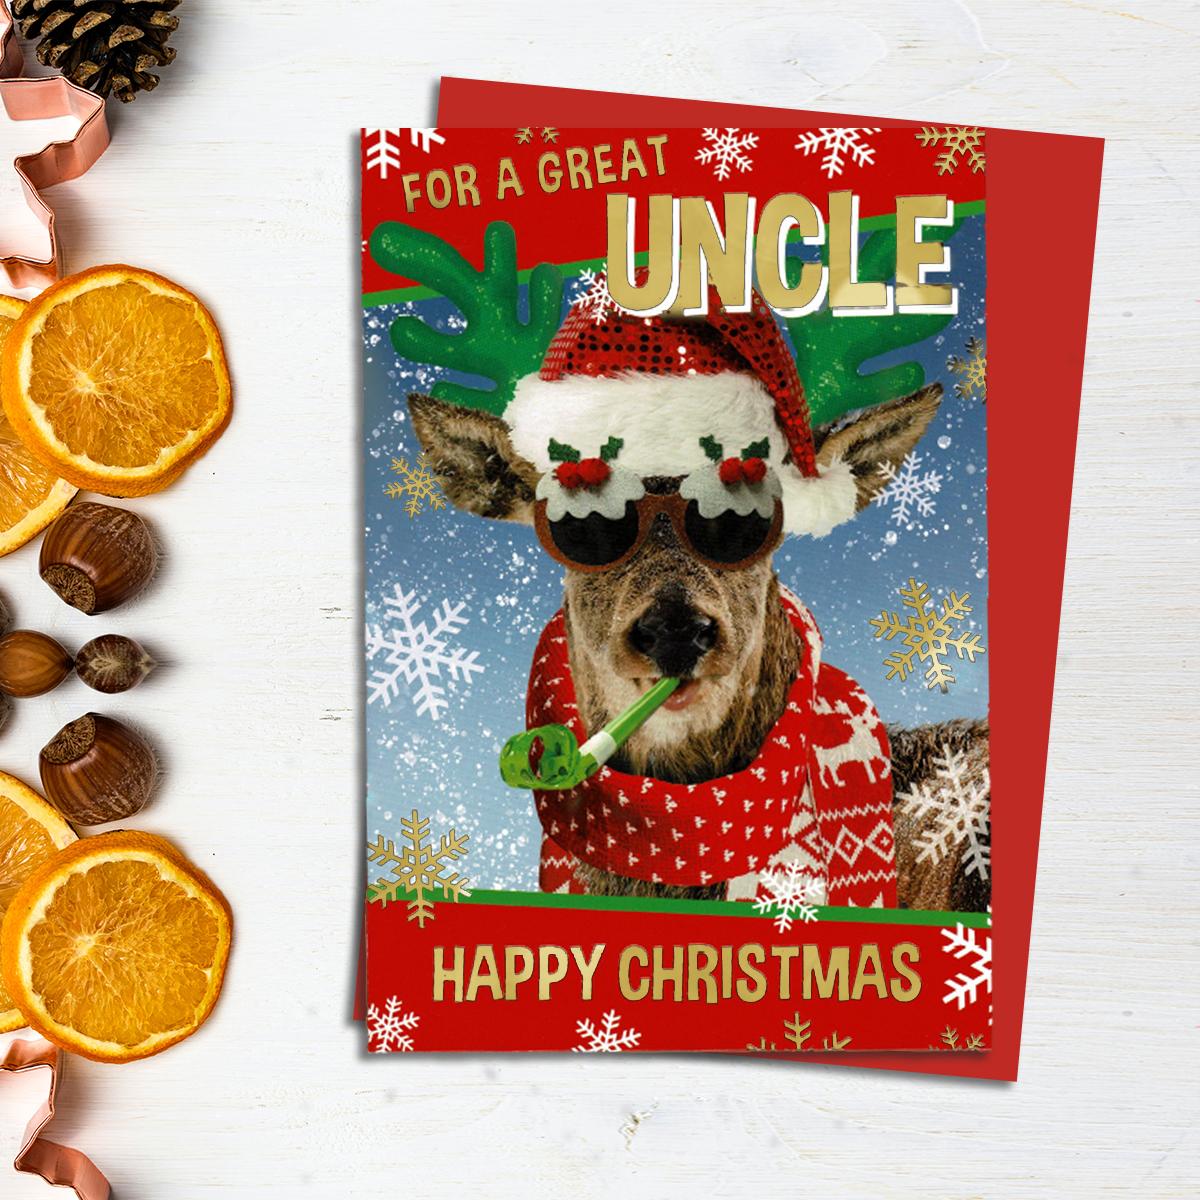 Uncle Humour Christmas Card Alongside Its Red Envelope